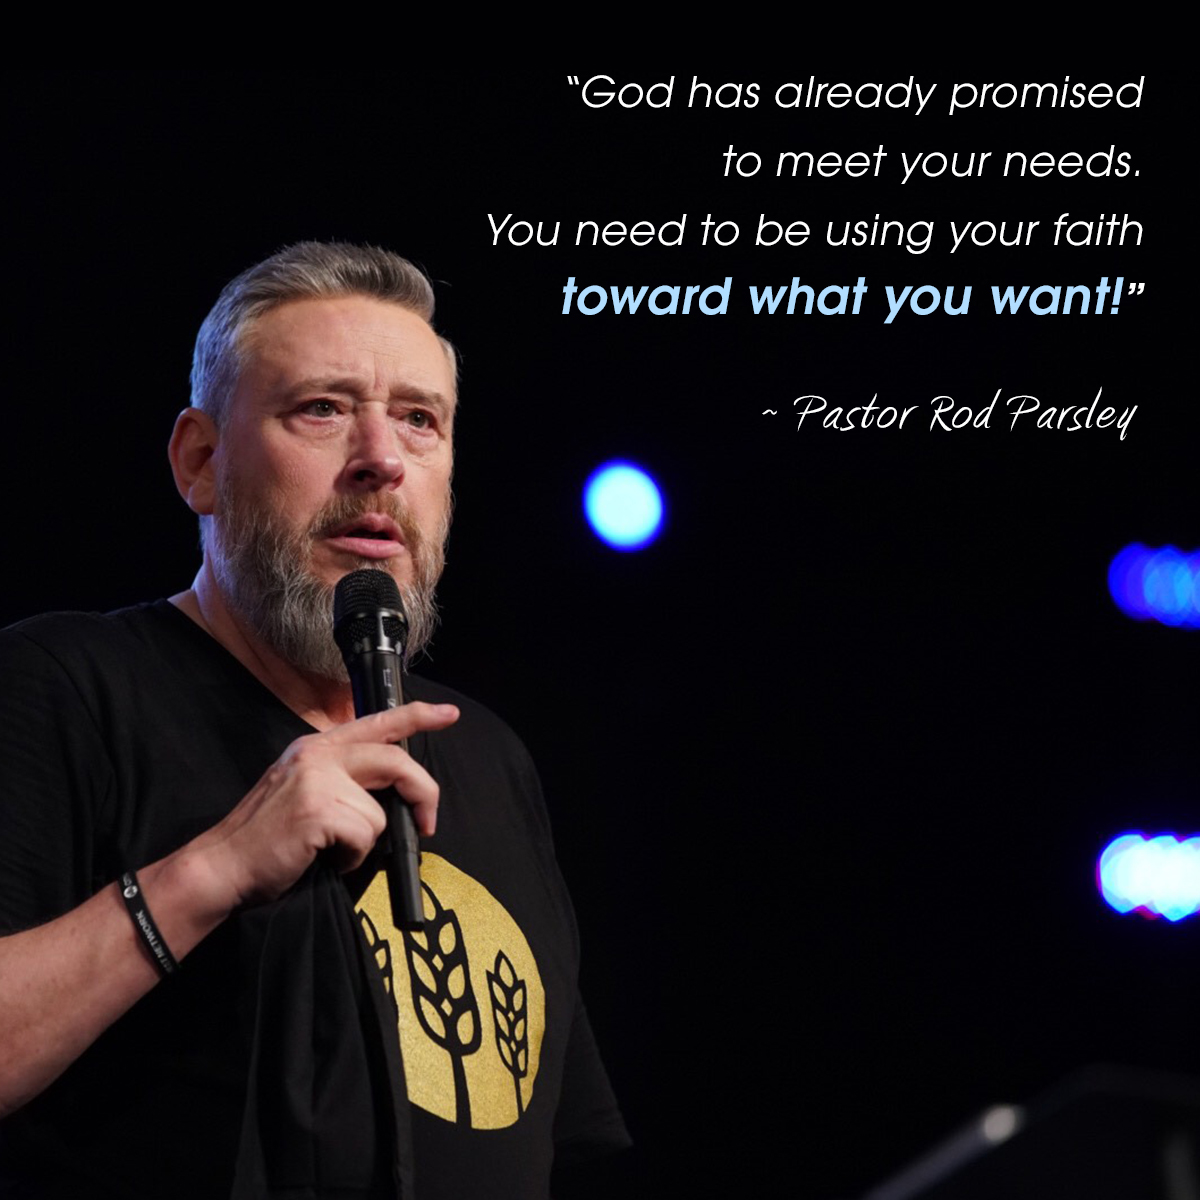 “God has already promised to meet your needs. You need to be using your faith toward what you want!” – Pastor Rod Parsley